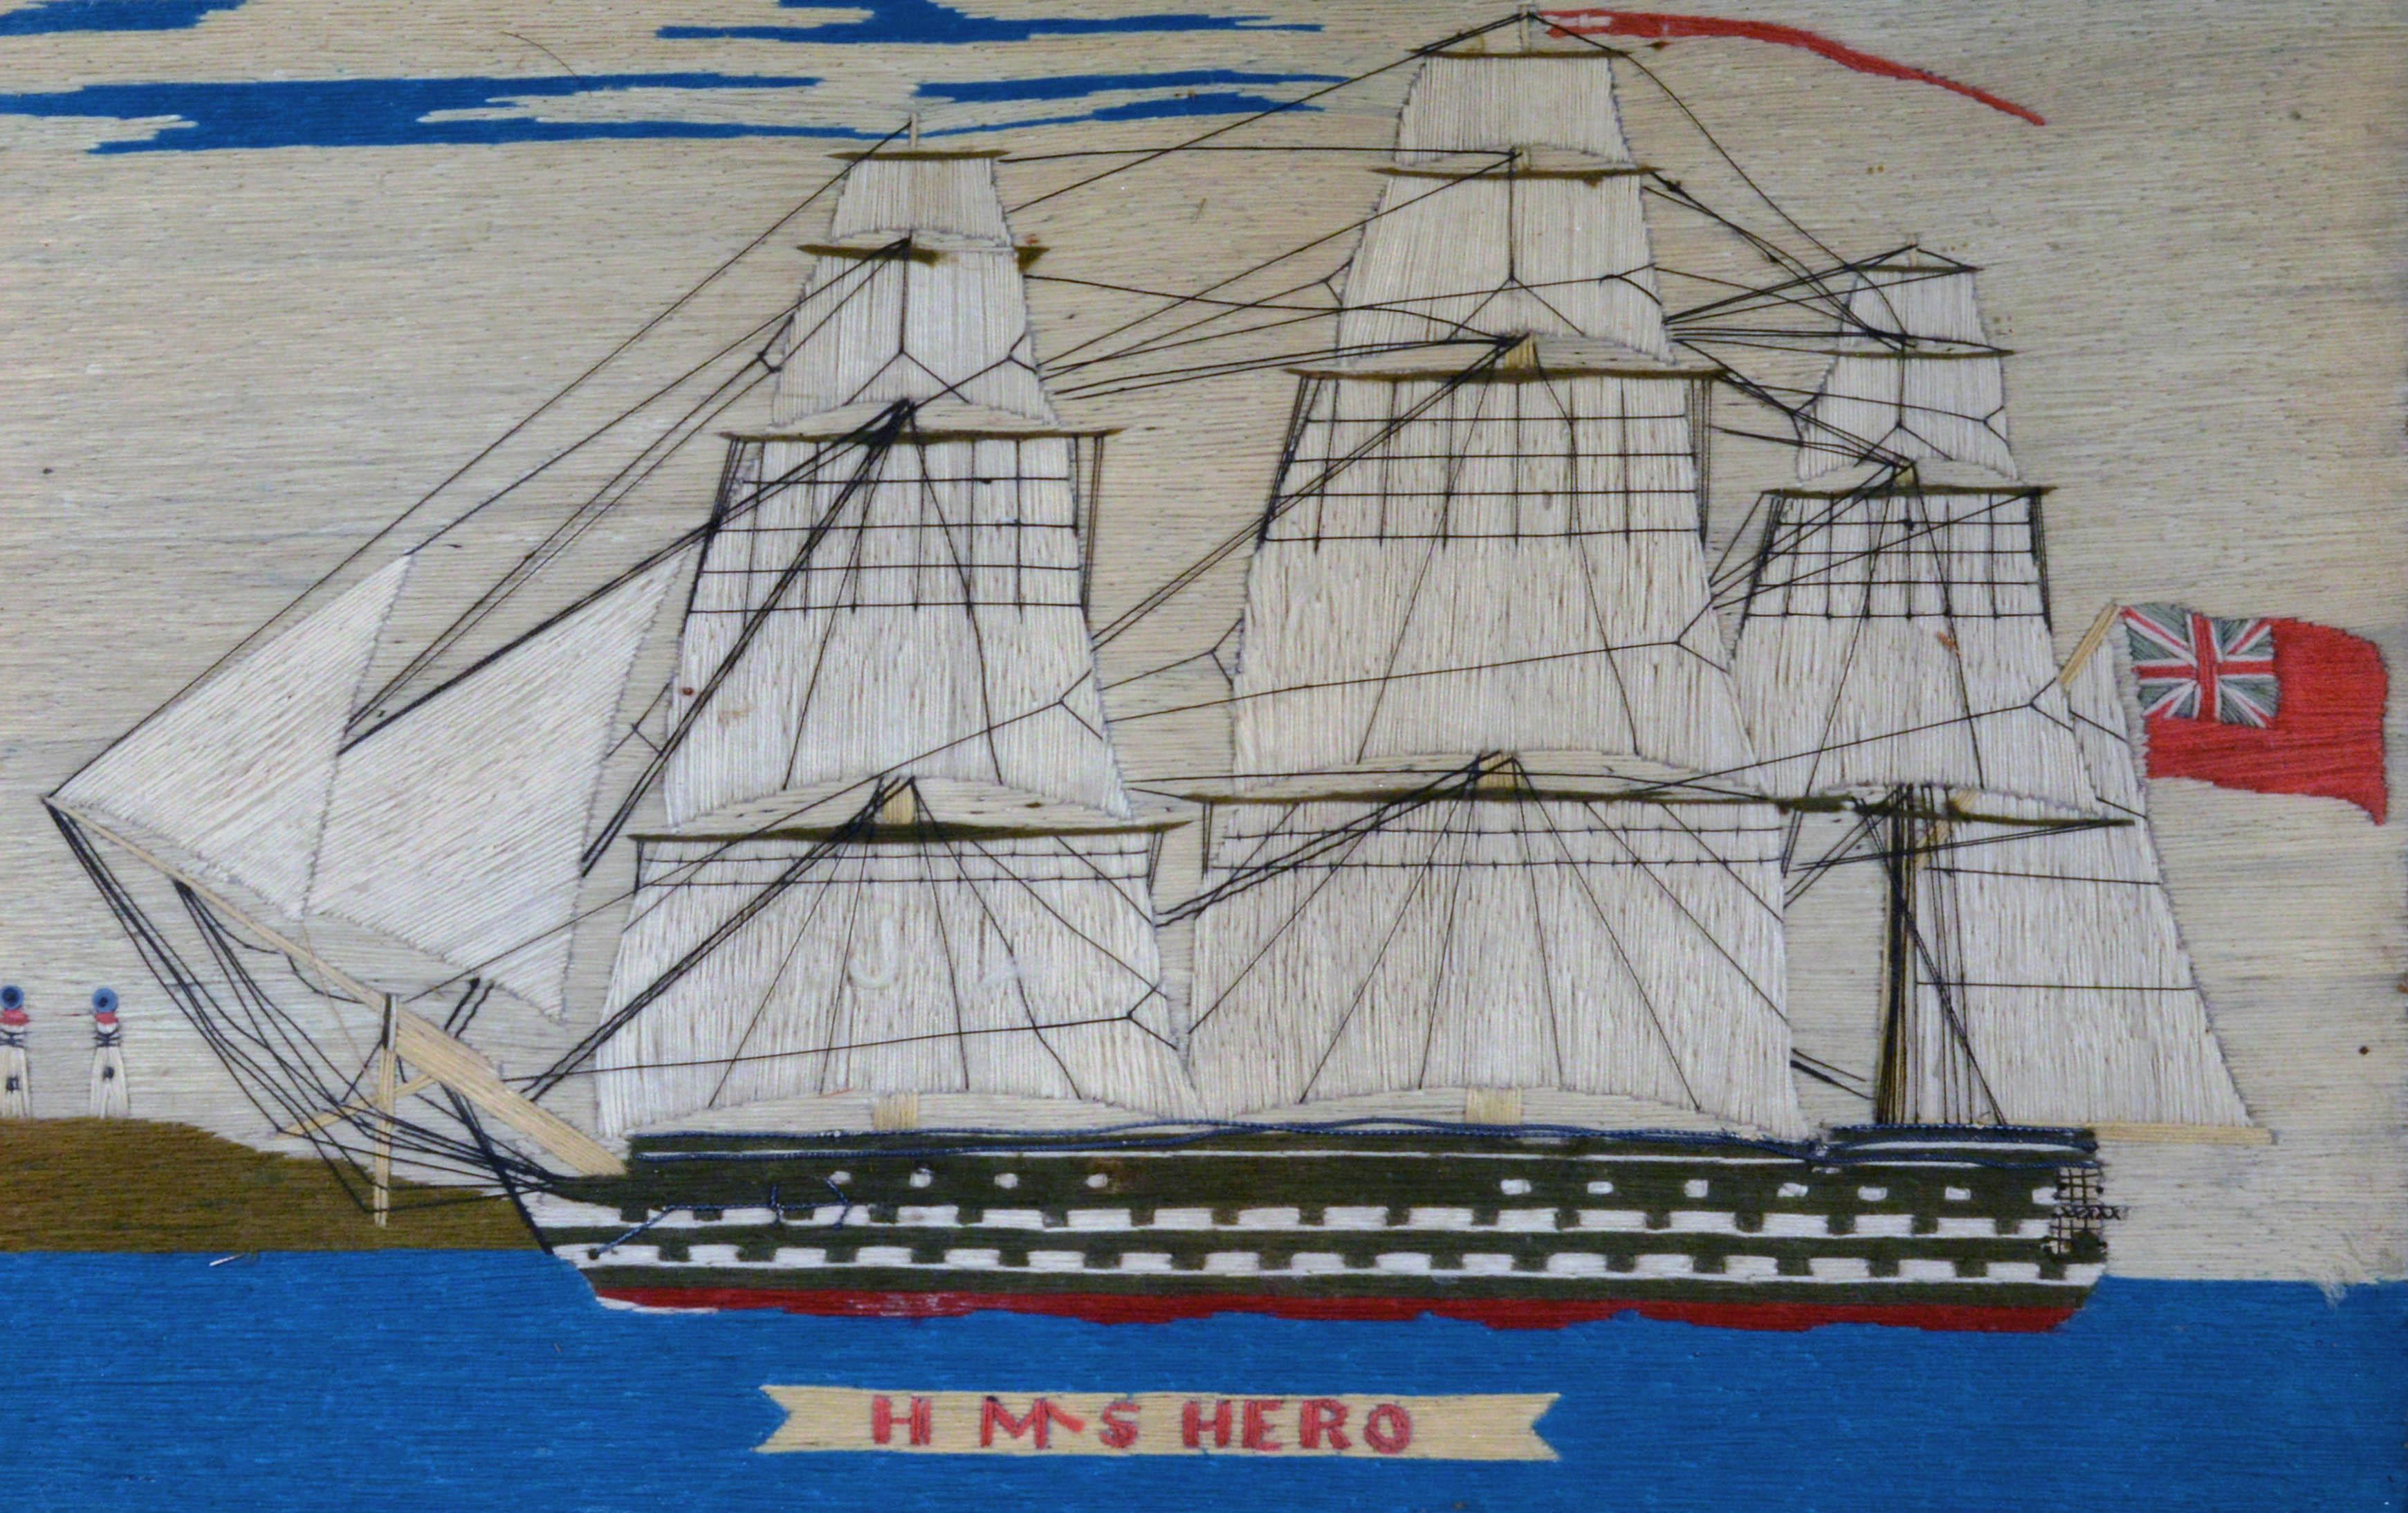 Sailor's woolwork picture of HMS Hero,
circa 1760-1764
  

The named ship, HMS Hero, is depicted in this sailor's woolie coming into port flying a Red Ensign and under full sail. All within a mahogany frame. Sewn below the ship on the dark blue